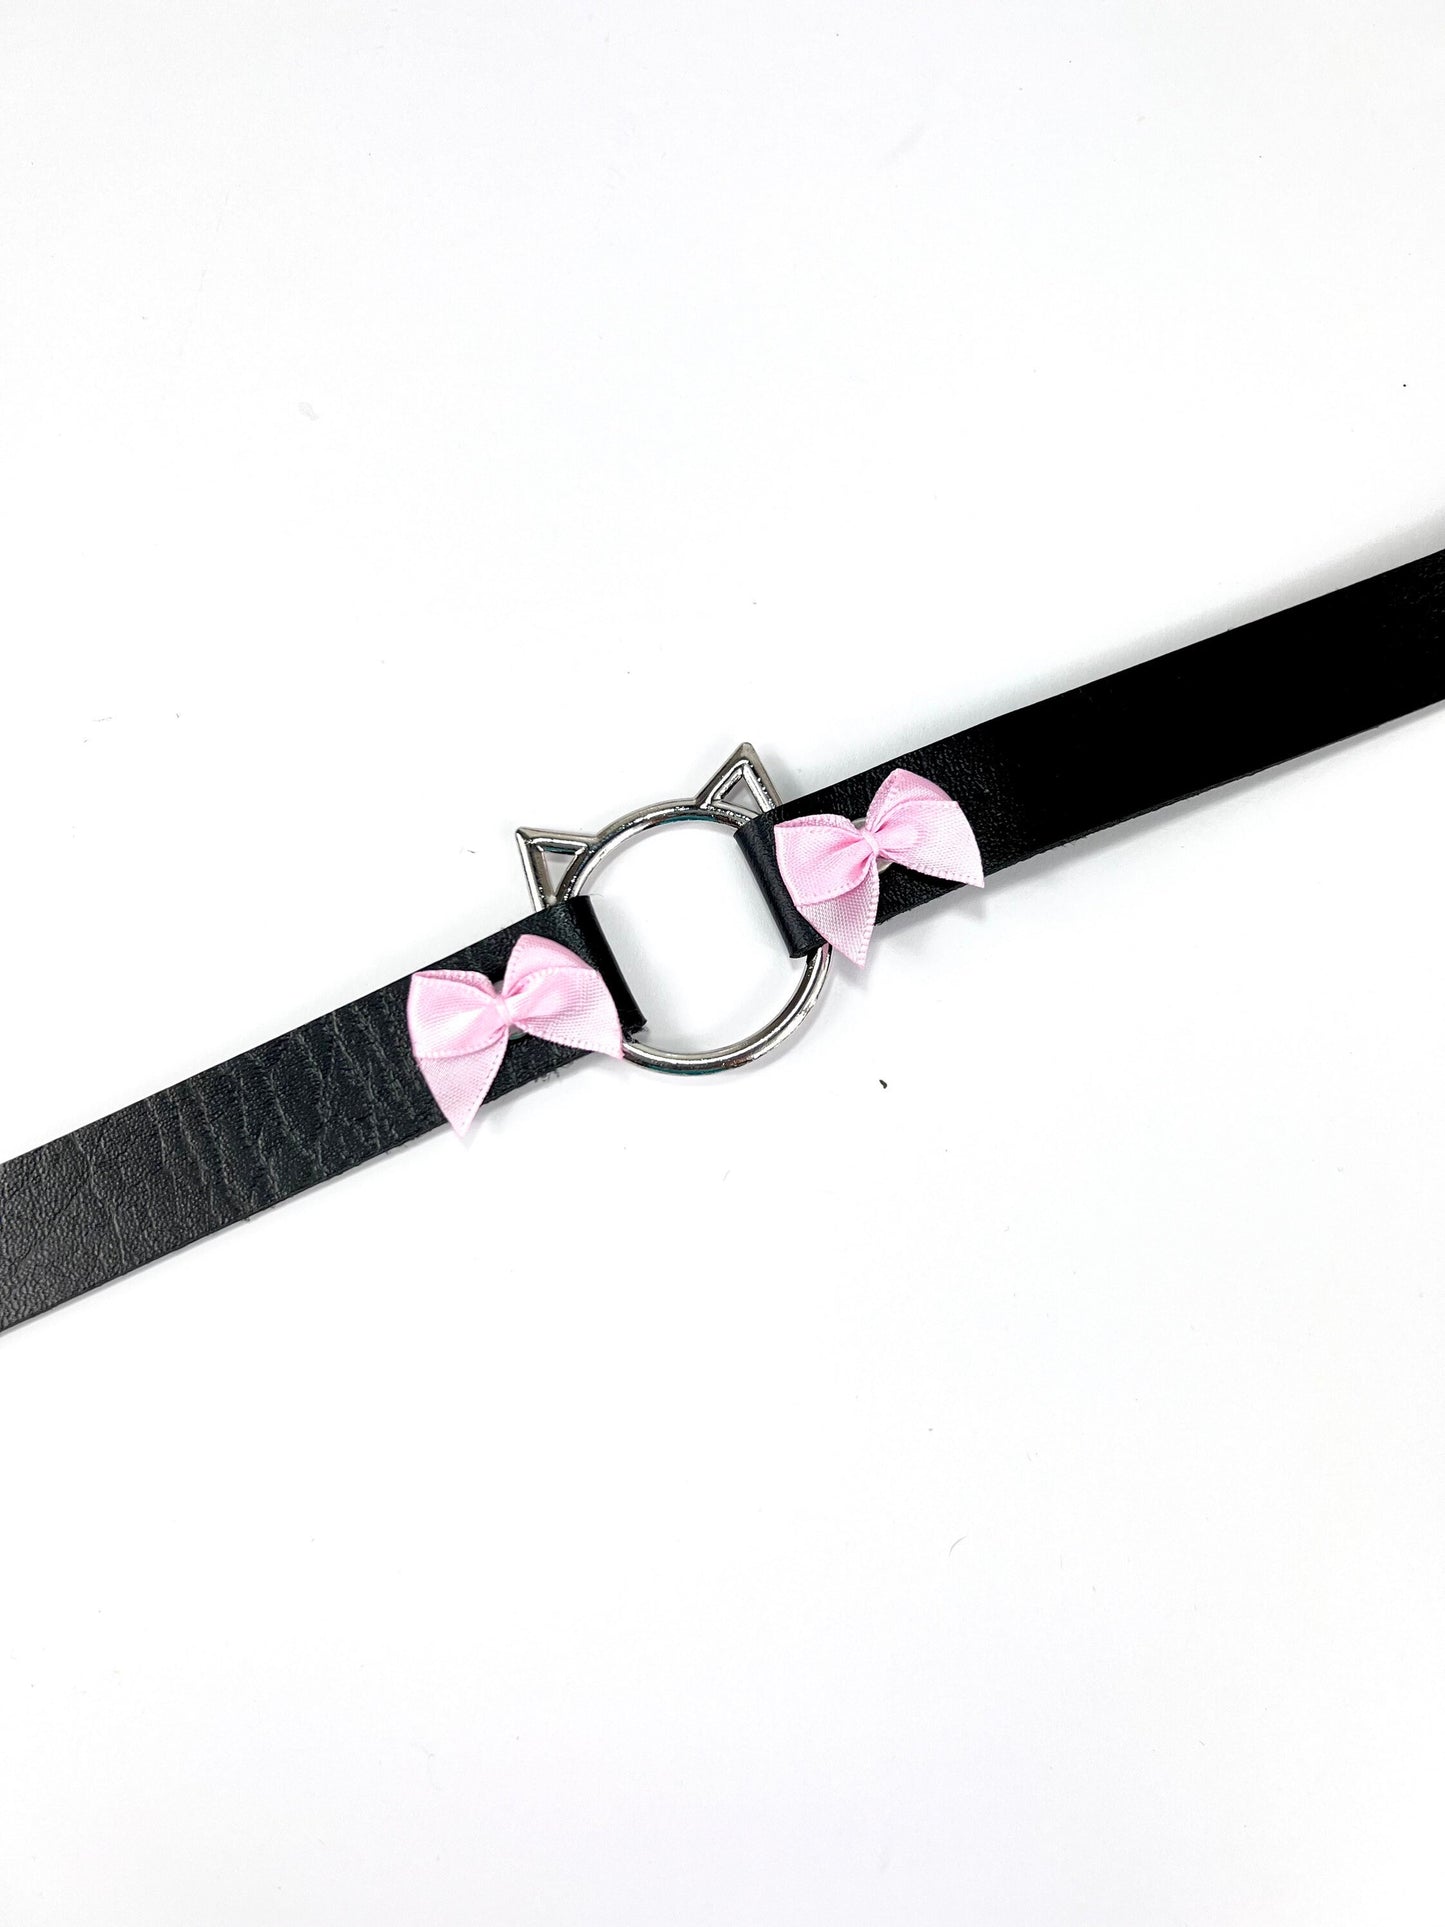 Black Cat Choker with Bows, Adjustable Faux Leather Cat Collar